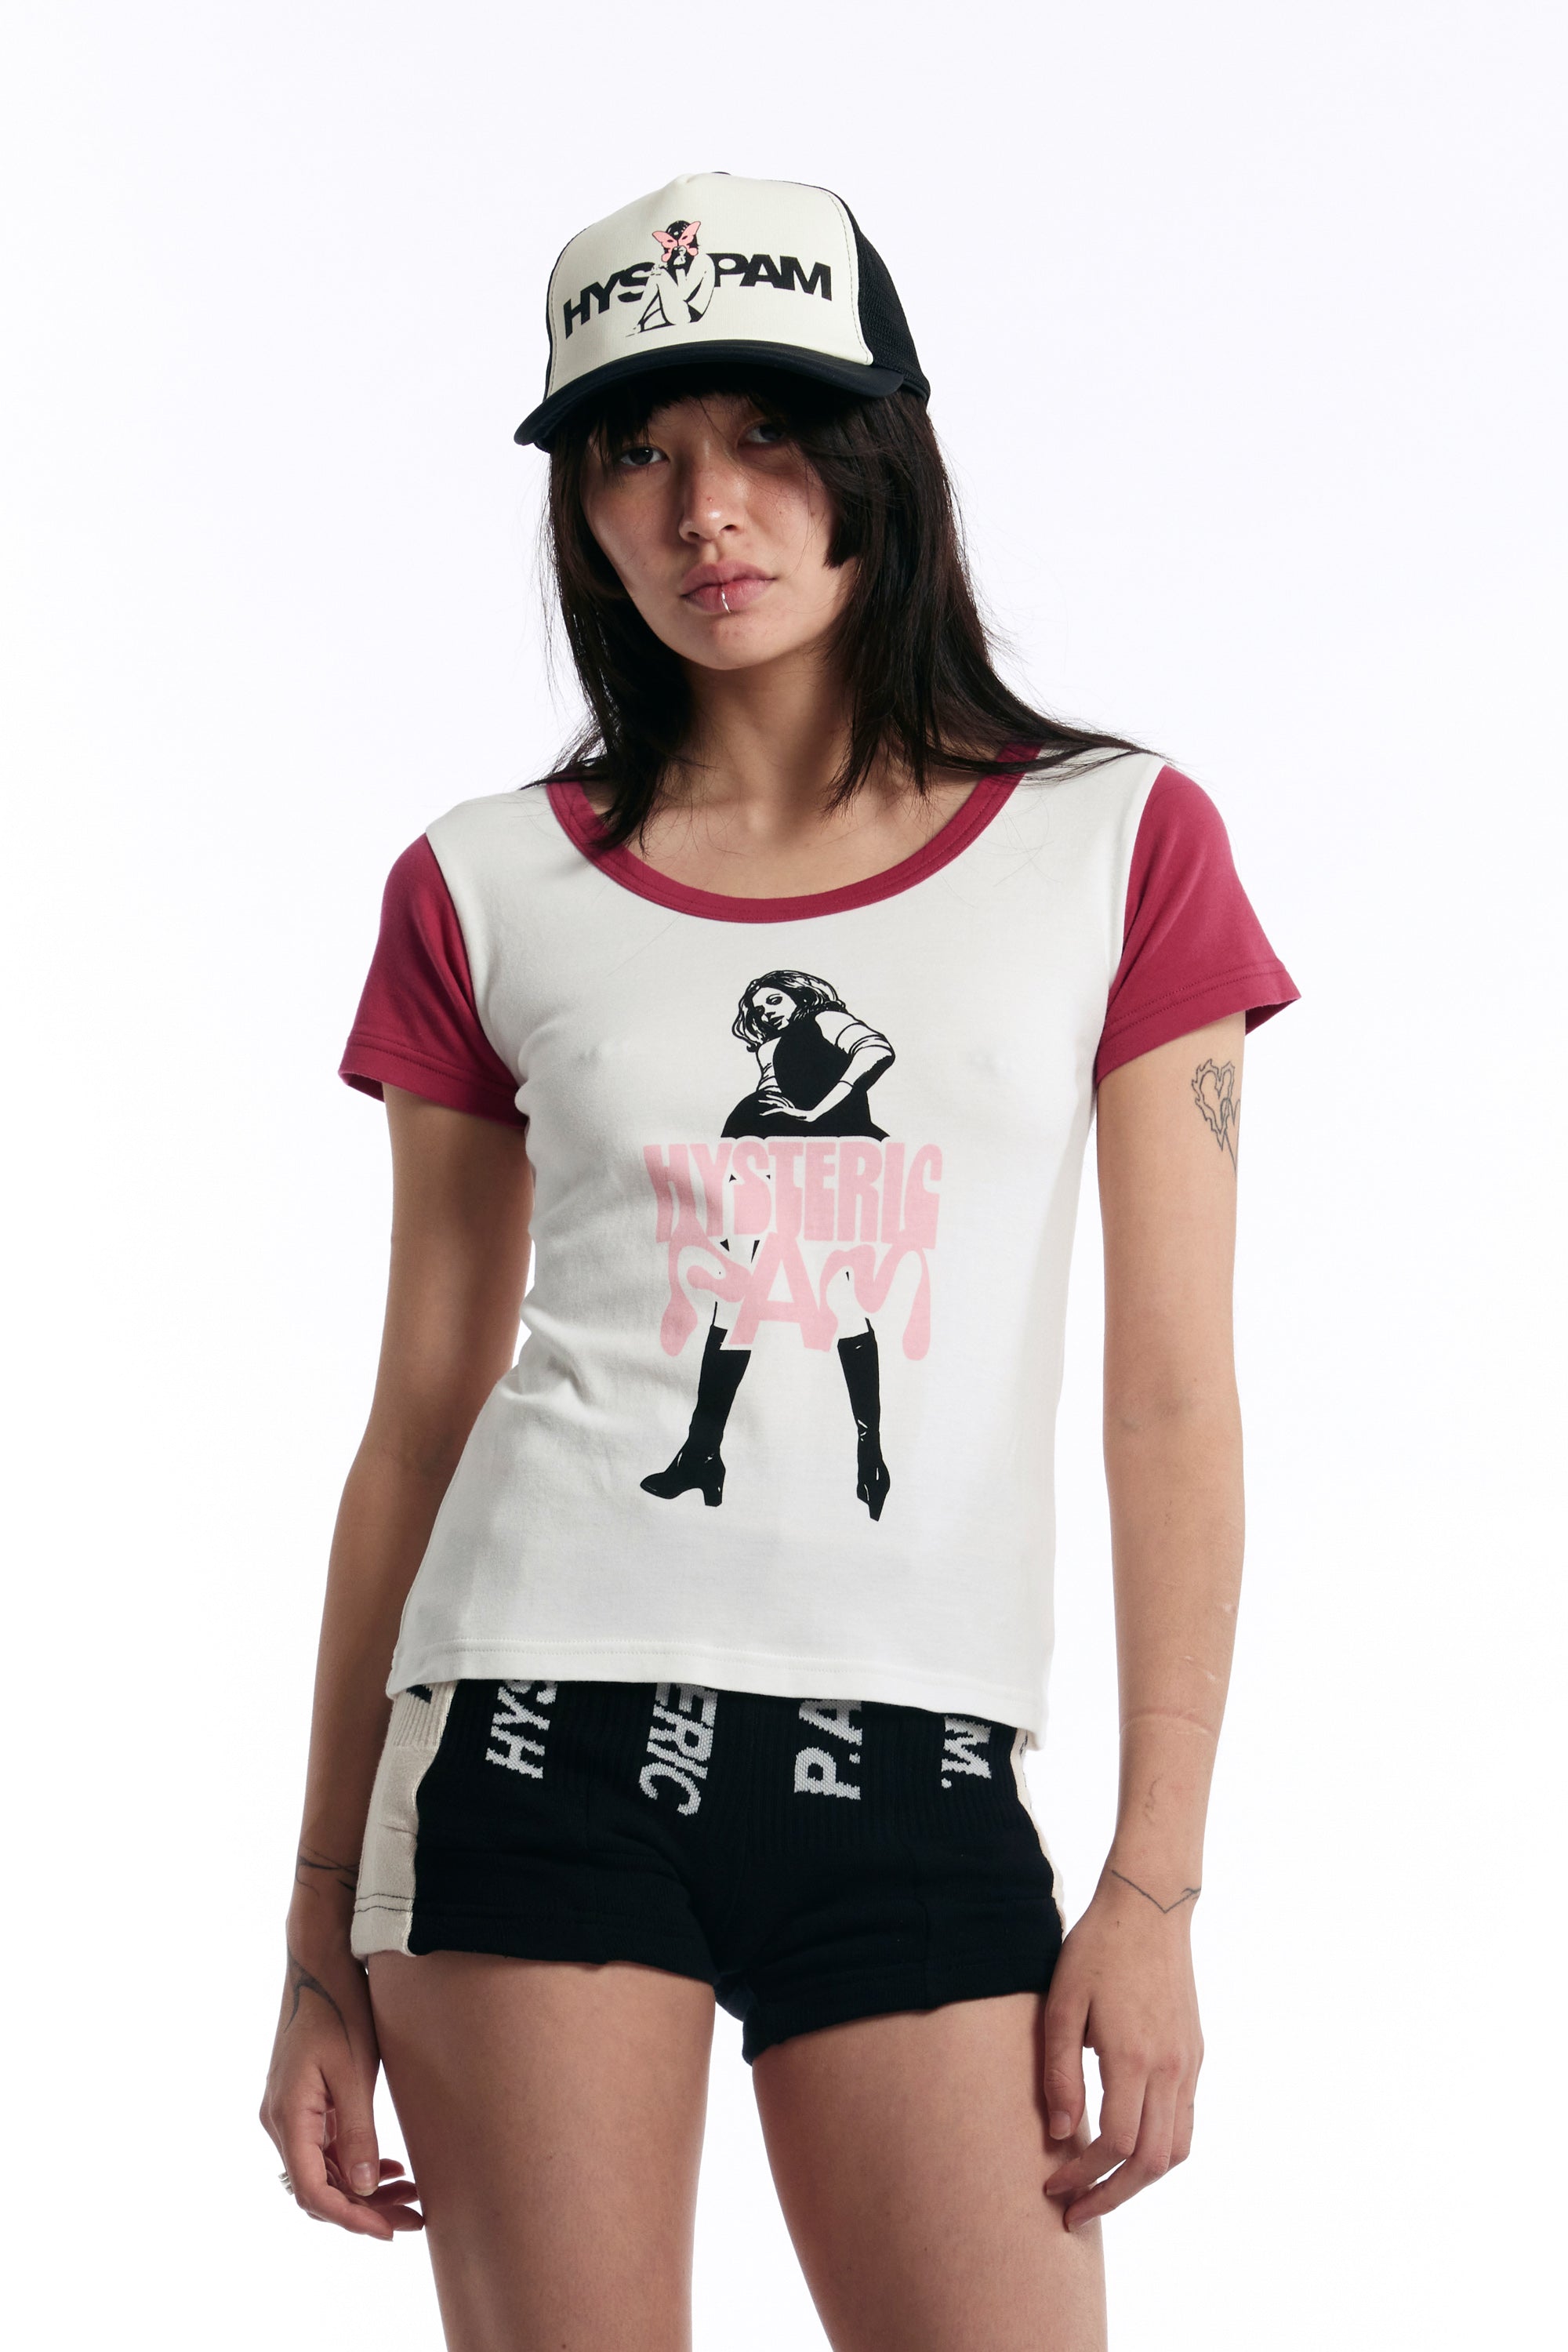 P.A.M. X HYSTERIC GLAMOUR – P.A.M. (Perks And Mini)